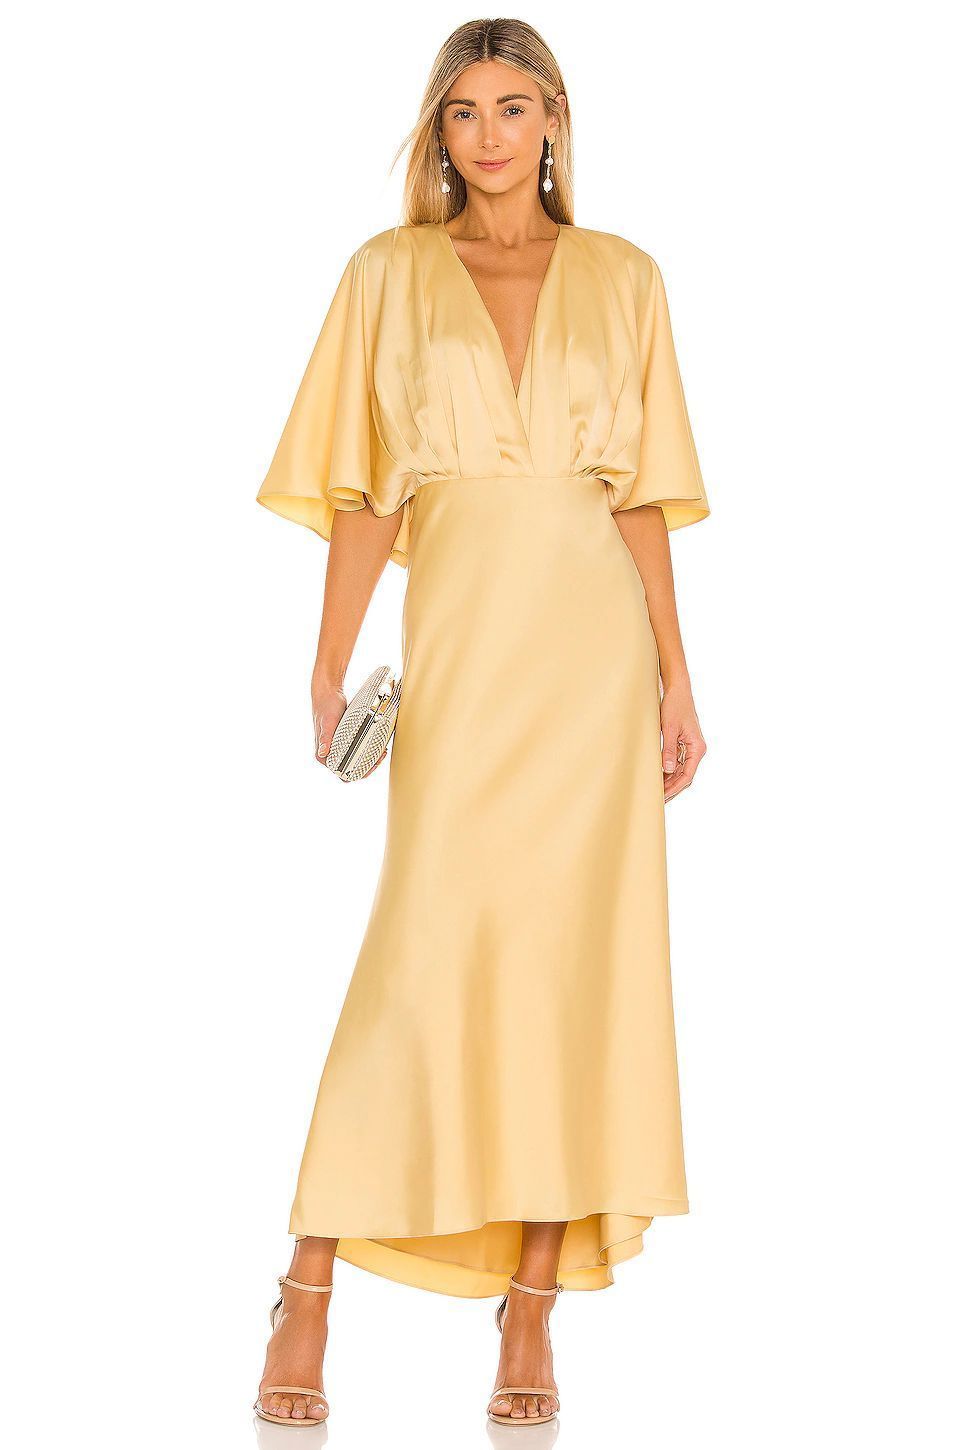 How yellow dress for bridesmaid is very
much attractive